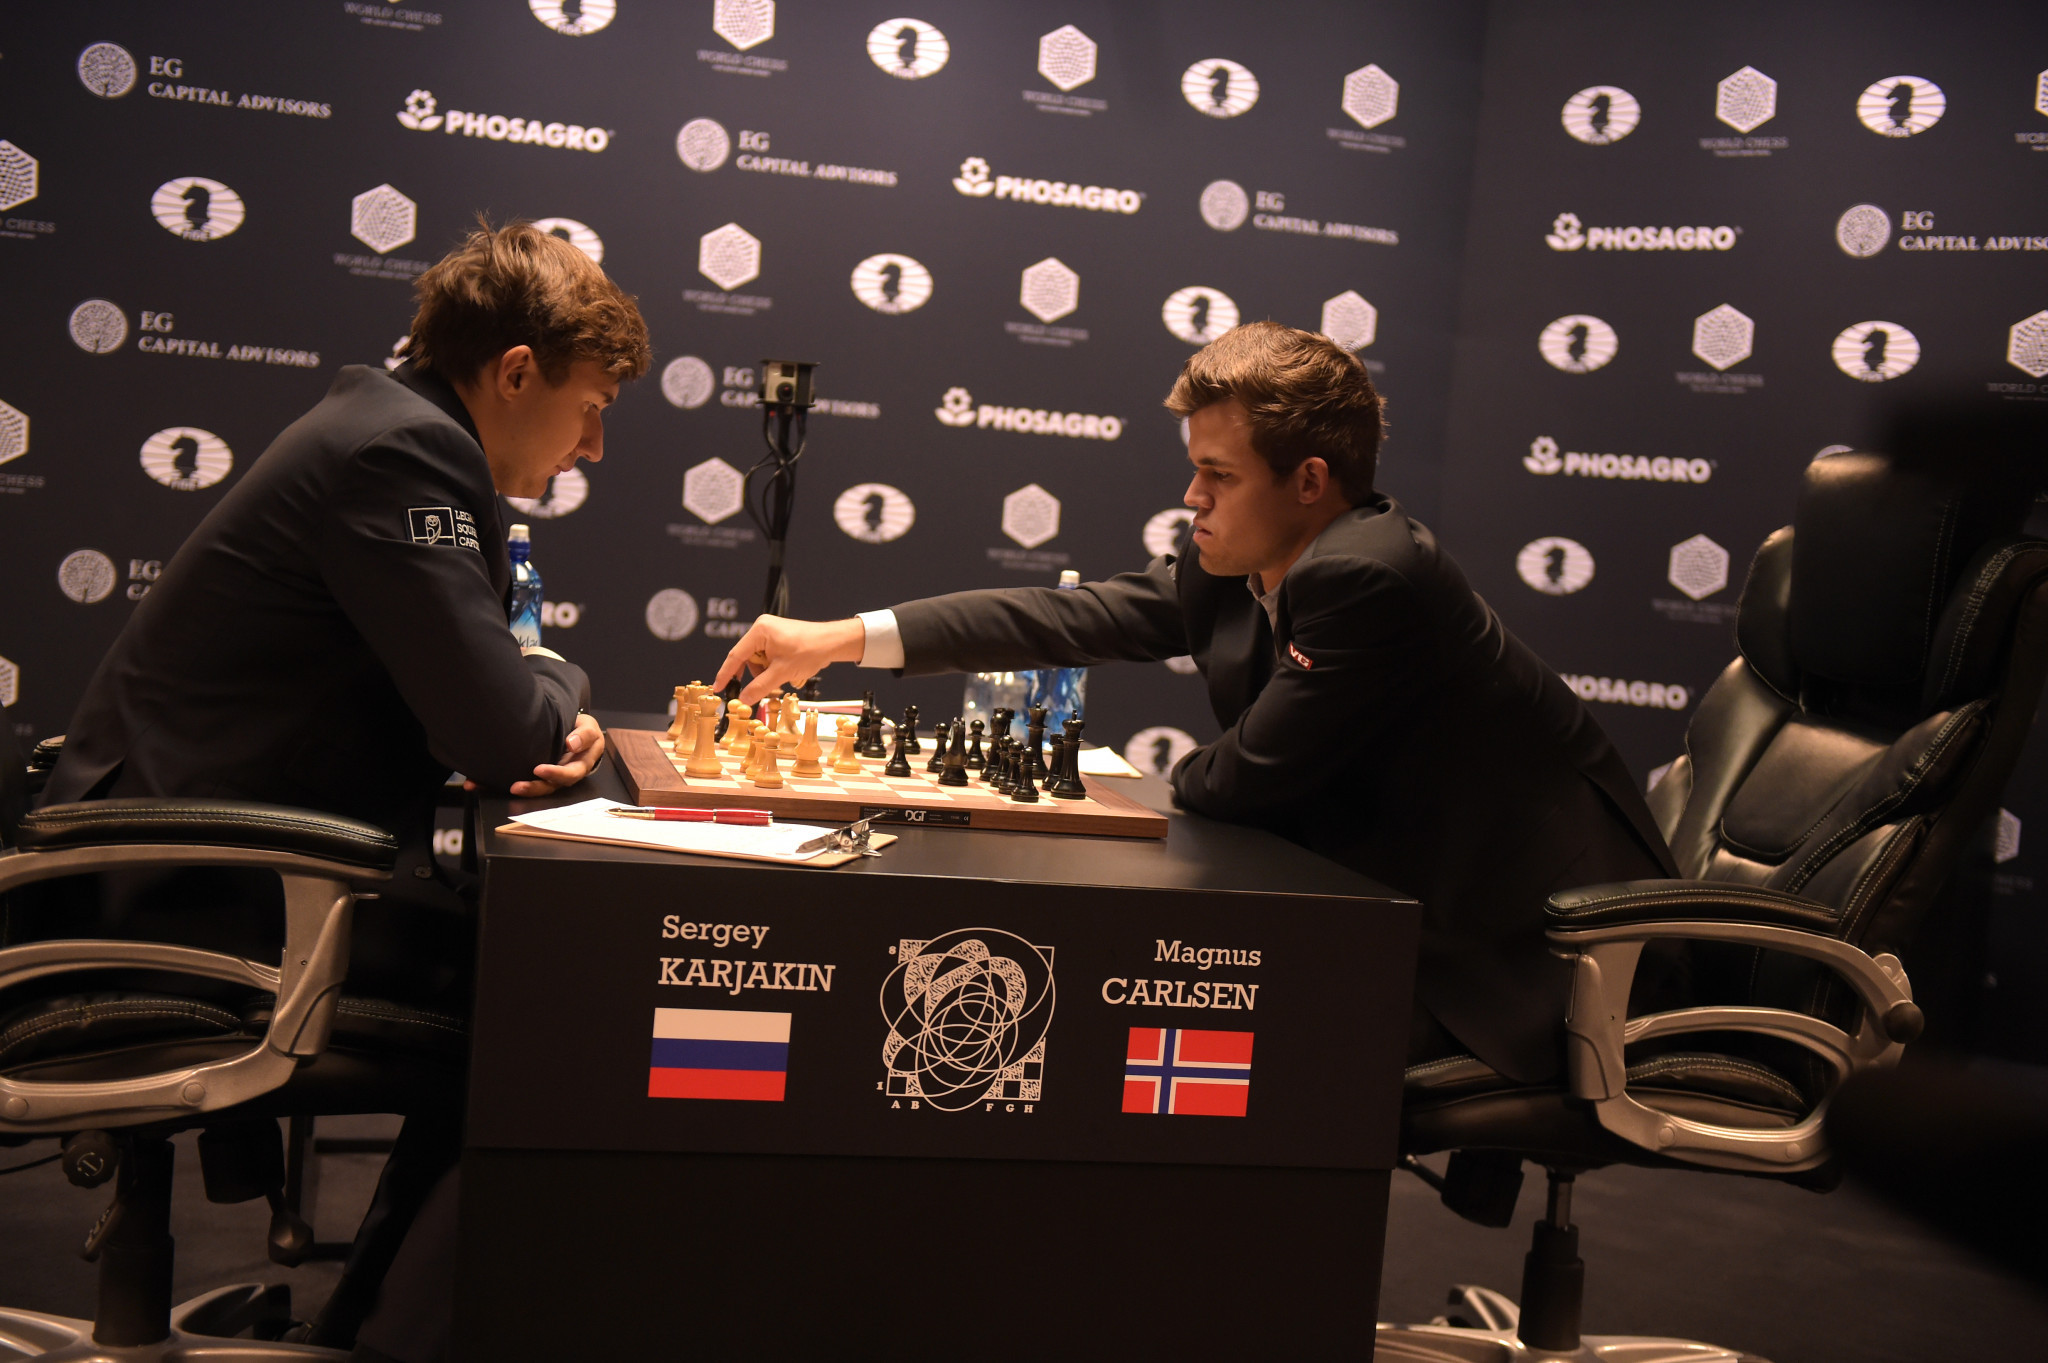 The World Chess Championship,held in New York City in 2016, between Norway's Carlsen Magnus and Russia's Sergey Karjakin had a media reach of 1.5 billion, it has been claimed ©Getty Images